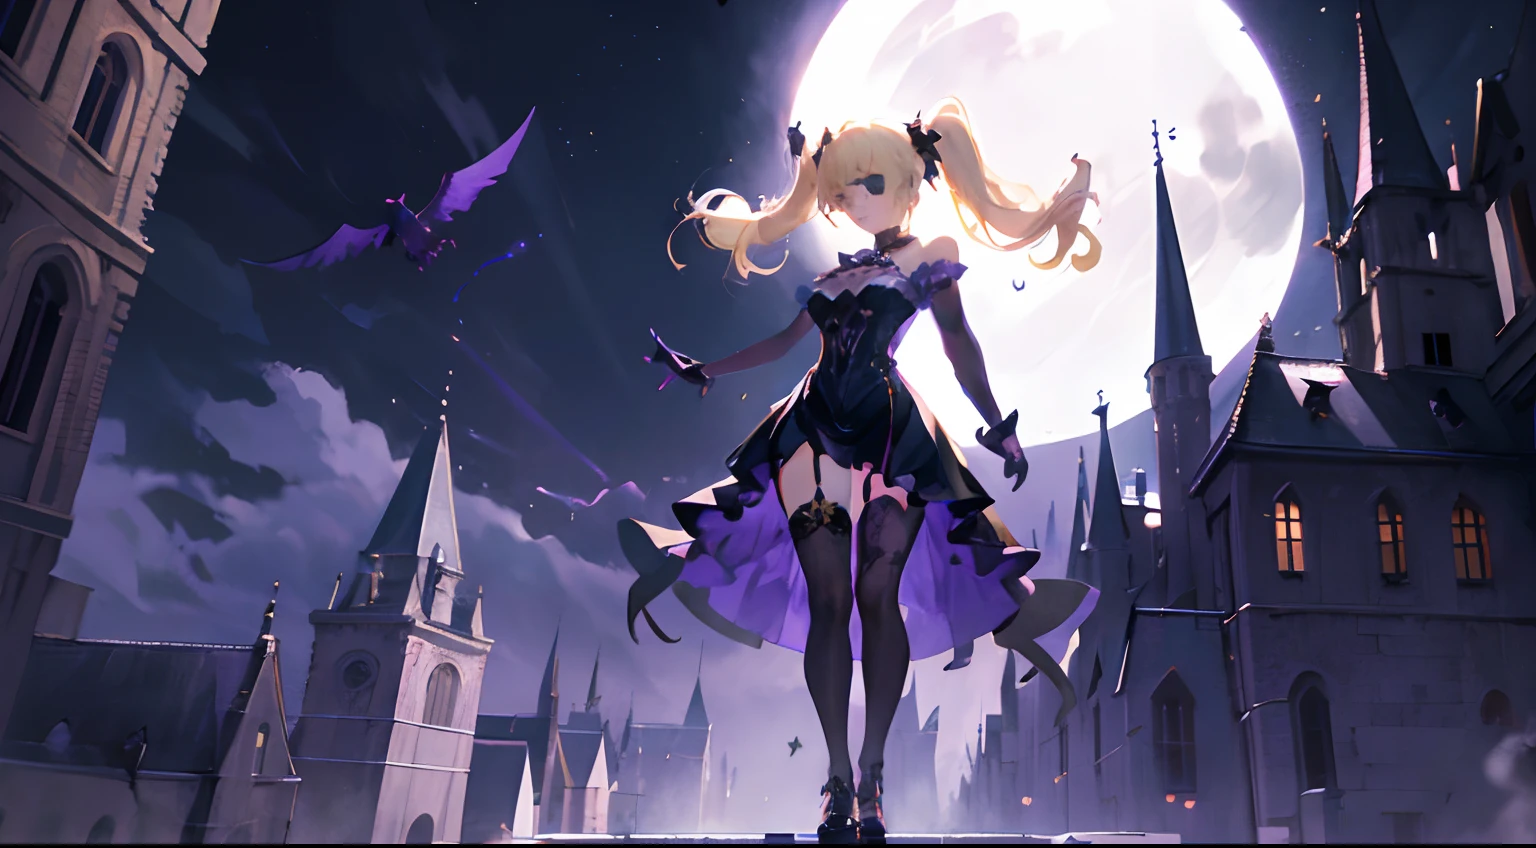 1 girl solo, blond hair ponytails, dark purple goth dress, long black gloves, ((eyepatch)), fullbody, standing on top of the gothic castle tower, night, moonlight, cinematic shot, dramatic, vibrant colours, raven flying near her